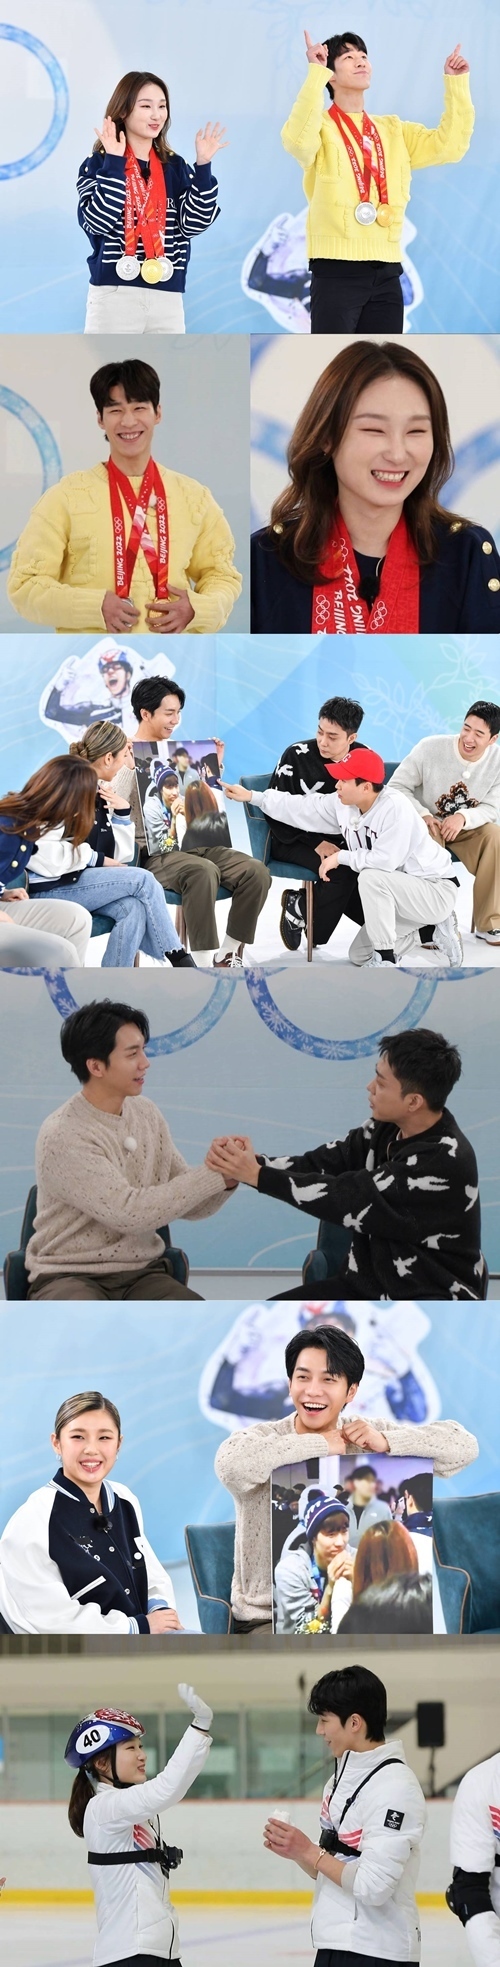 Hwang Dae-heon and Choi Min-jung reveal the truth of the romance.SBS All The Butlers, which will be broadcast on March 6, will join the Golden Masters who won the first gold medal and the last gold medal in South Korea at the 2022 Beijing Winter Olympics.On this day, All The Butlers will be accompanied by Beijing Winter Olympic gold medalists Hwang Dae-heon and Choi Min-jung for the first time.The two masters, who have already attracted a lot of attention with the preliminary video released on the 27th, will show off the truth of the heat that made the South Korea hot from the Olympic behind-the-scenes story, and will show off the charm of the reverse 180 degrees different from the appearance on the ice.In particular, Hwang Dae-heon and Choi Min-jung, who had a conversation with each other by holding each others hands and looking at each other, were the back door of the story that they had a pink atmosphere that was so sweet and suspicious to the members during the filming of All The Butlers.In the meantime, Hwang Dae-heons sudden Simkung Re-Ment toward Choi Min-jung turned upside down.I wonder what the truth of the romance that Hwang Dae-heon and Choi Min-jung confessed is.